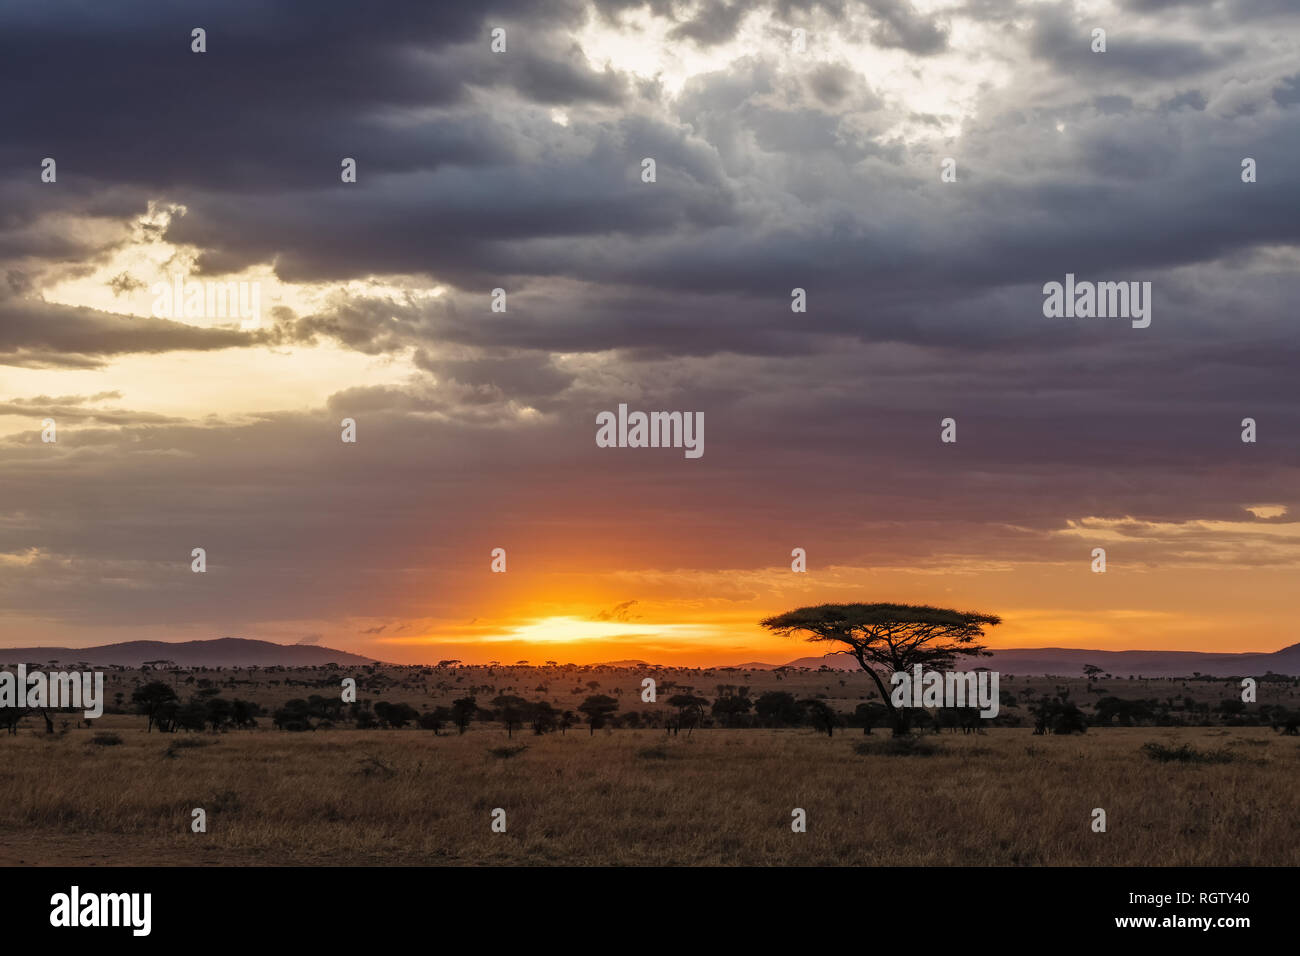 The Serengeti is one of the most popular nature reserves in the world and is also a UNESCO World Heritage Site. It is home to a variety of animals. Stock Photo